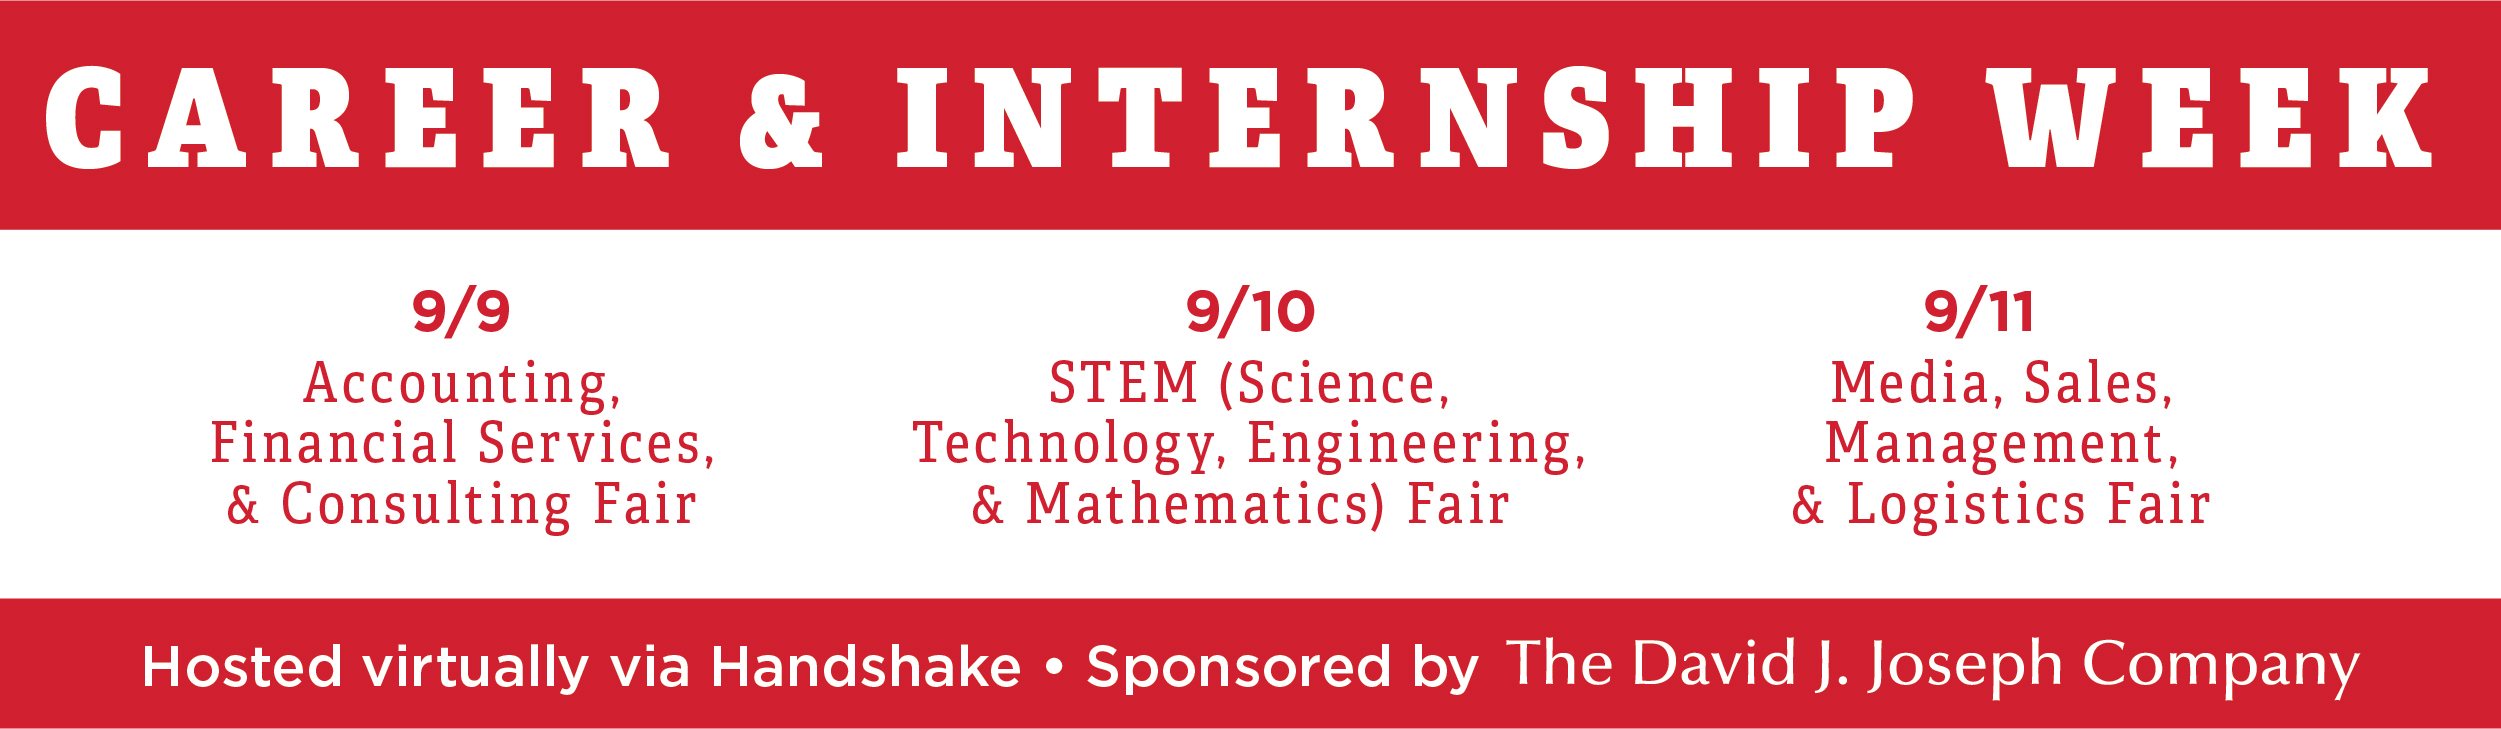 Career & Internship Week 9/9 Accounting, Financial Services, and Consulting Fair 9/10 Science, Technology, Engineering, & Mathematics (STEM) Fair 9/11 Media, Sales, Management, & Logistics Fair Hosted virtually on Handshake Sponsored by The David J Joseph Company 